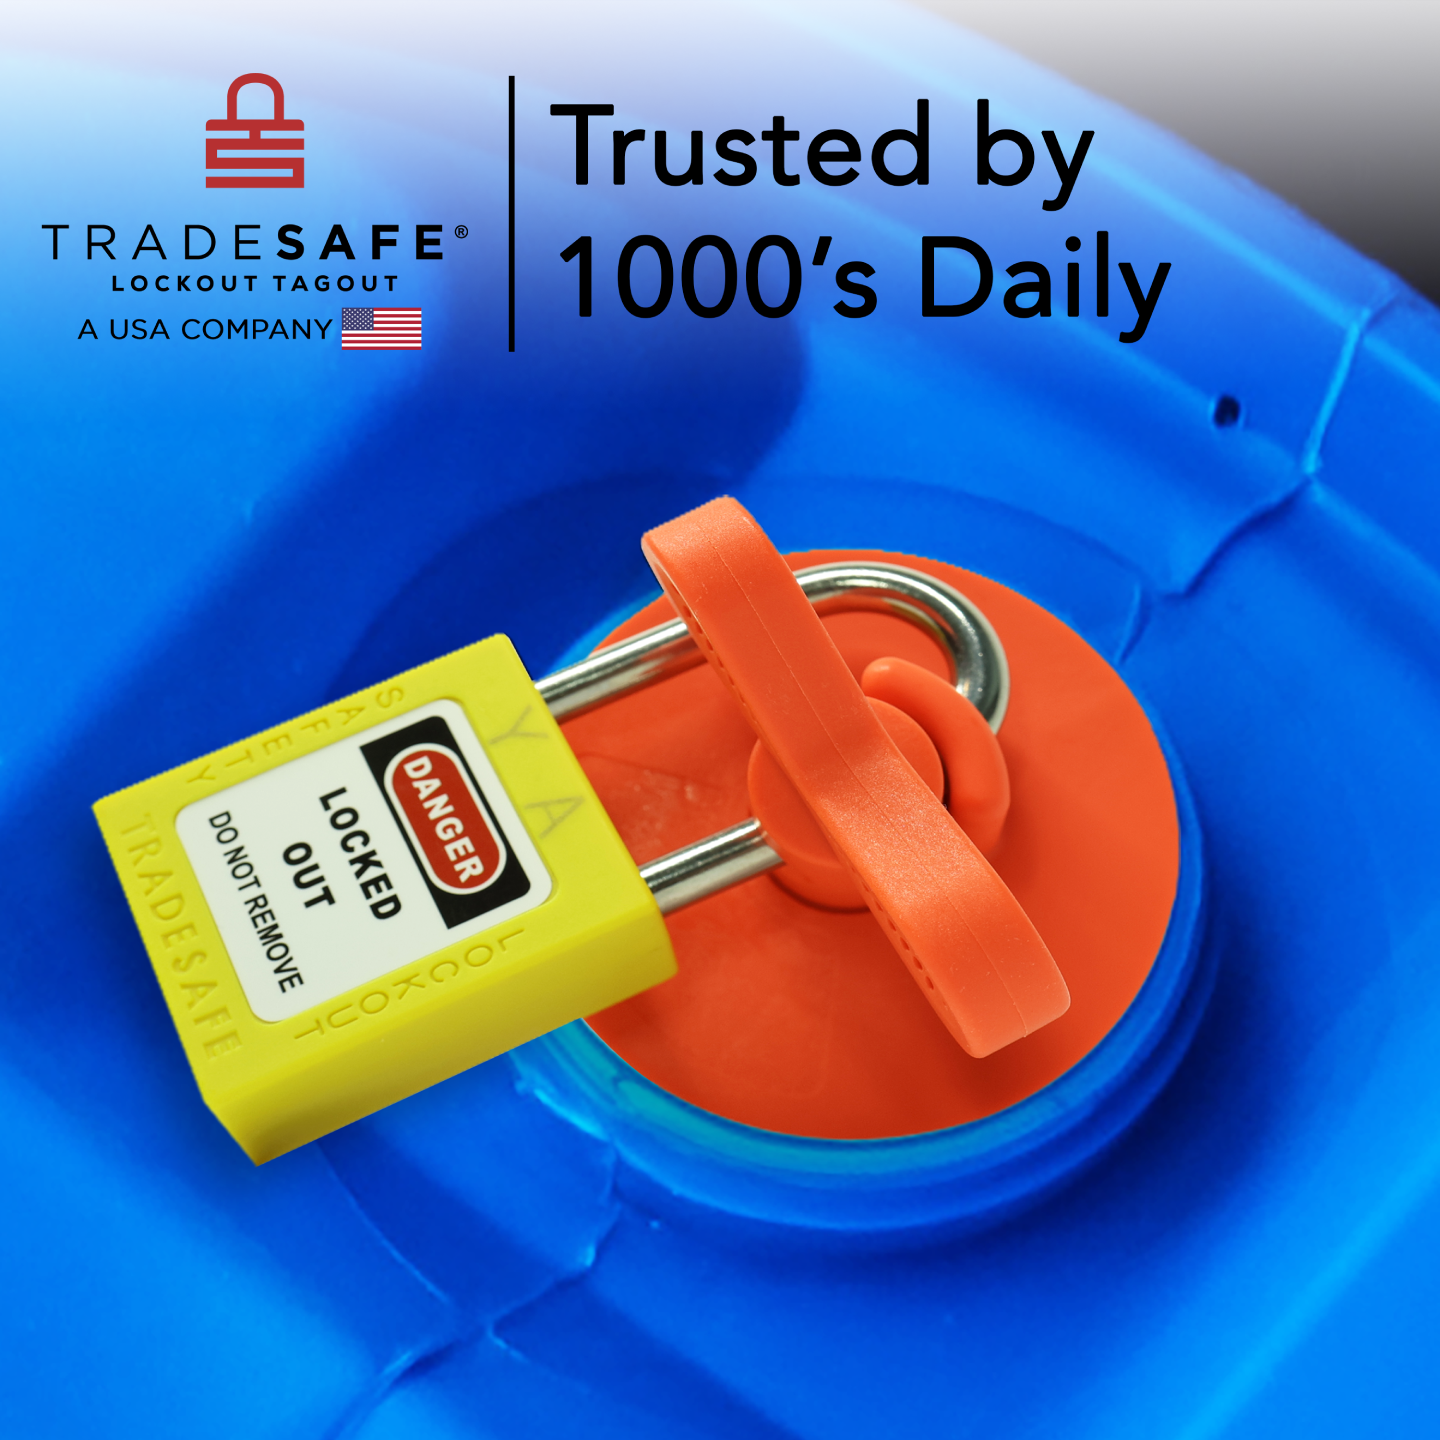 TRADESAFE nylon drum plug lock: trusted by 1000's daily